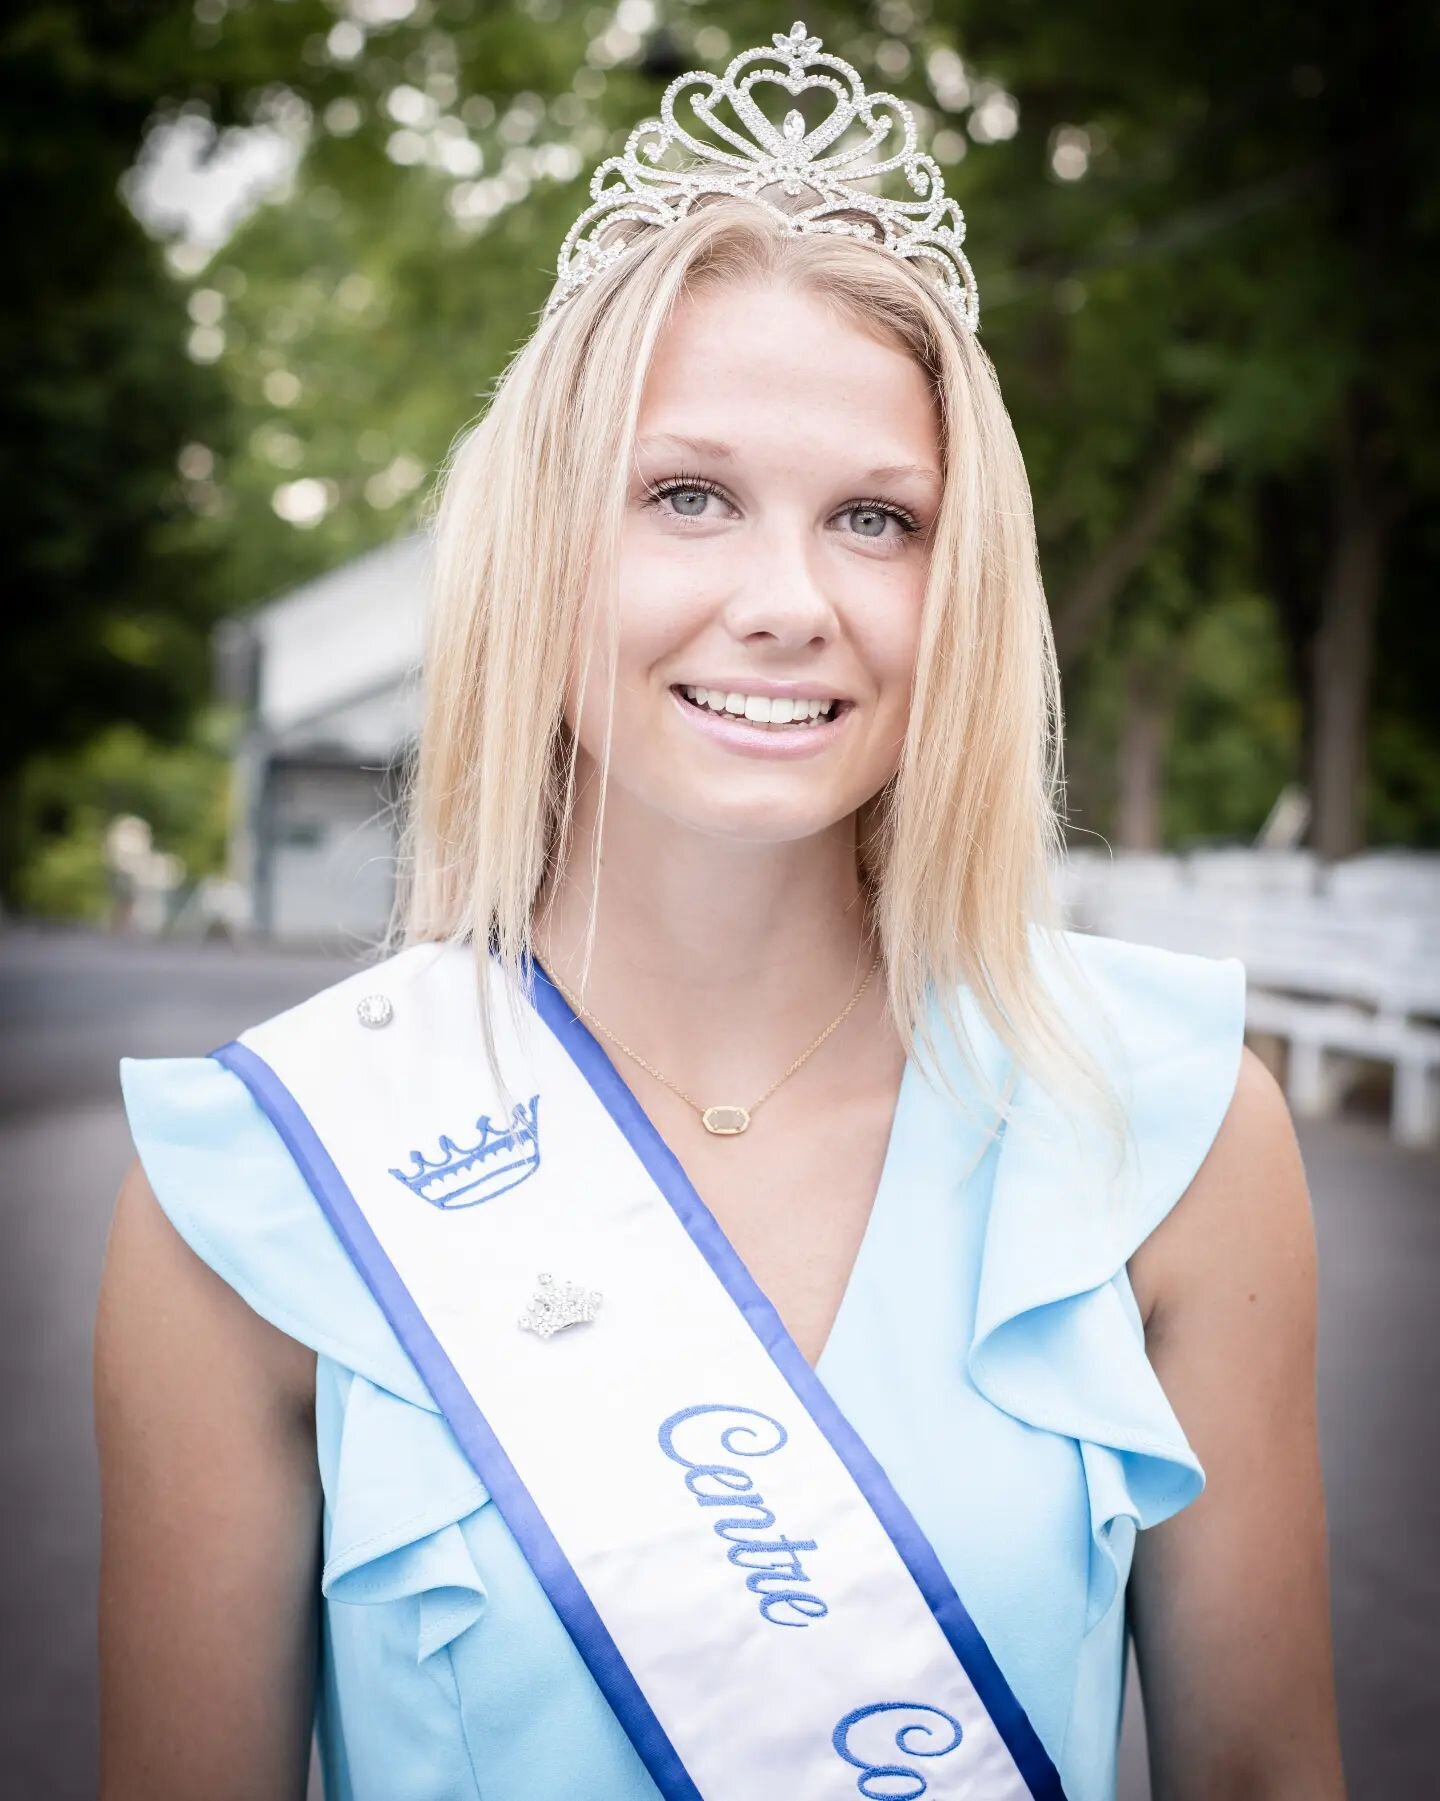 Today's the day!!!!

Join me at the Southside stage at 6pm today to say farewell to Mattee, and crown our 2022 Grange Fair Queen!

Mattee- thank you for making this year one to remember! I have loved working with you so much and I cant wait to see wh